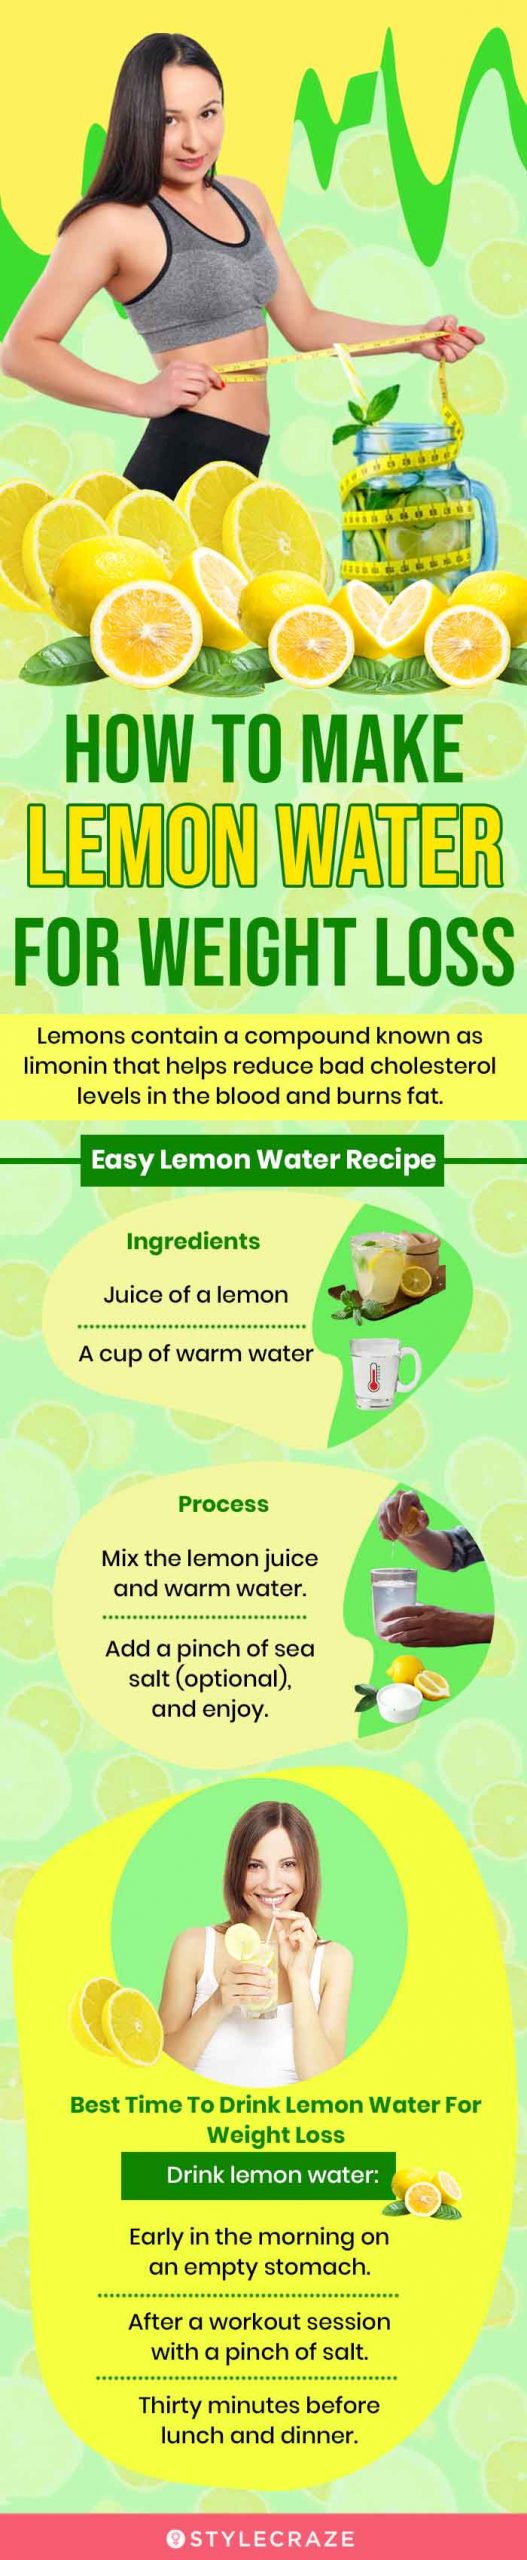 how to make lemon water for weight loss (infographic)